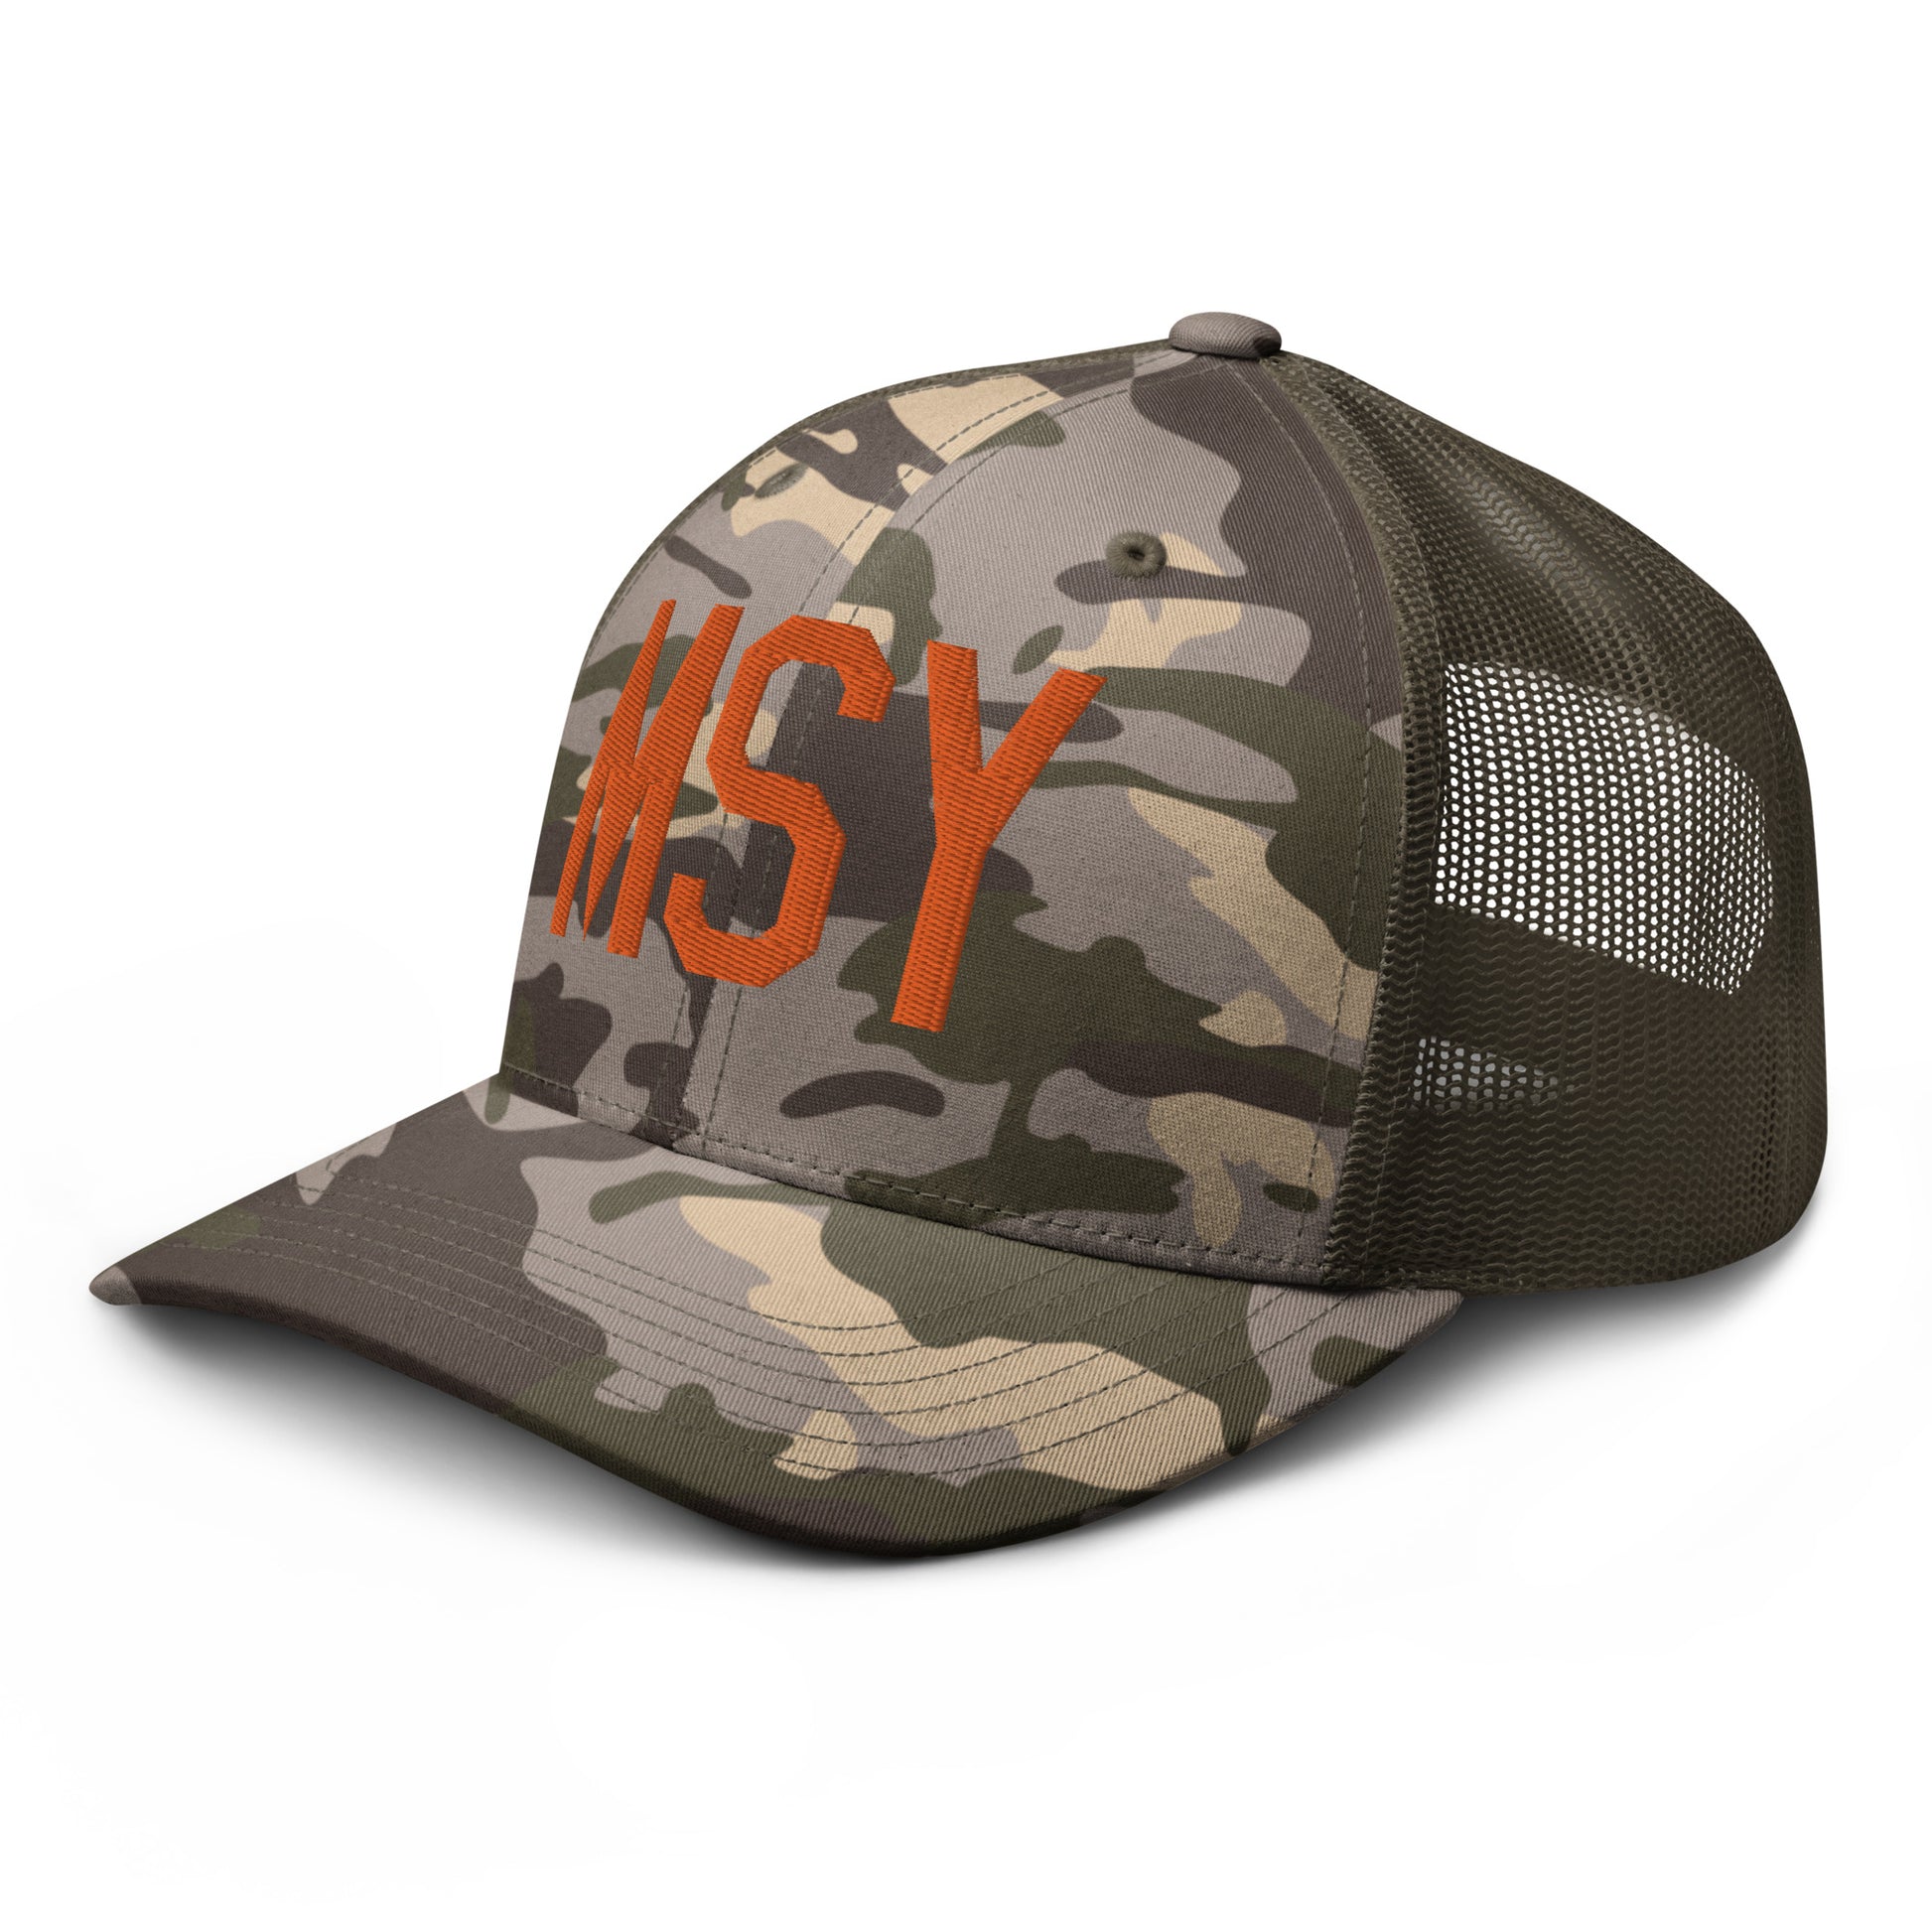 Airport Code Camouflage Trucker Hat - Orange • MSY New Orleans • YHM Designs - Image 19